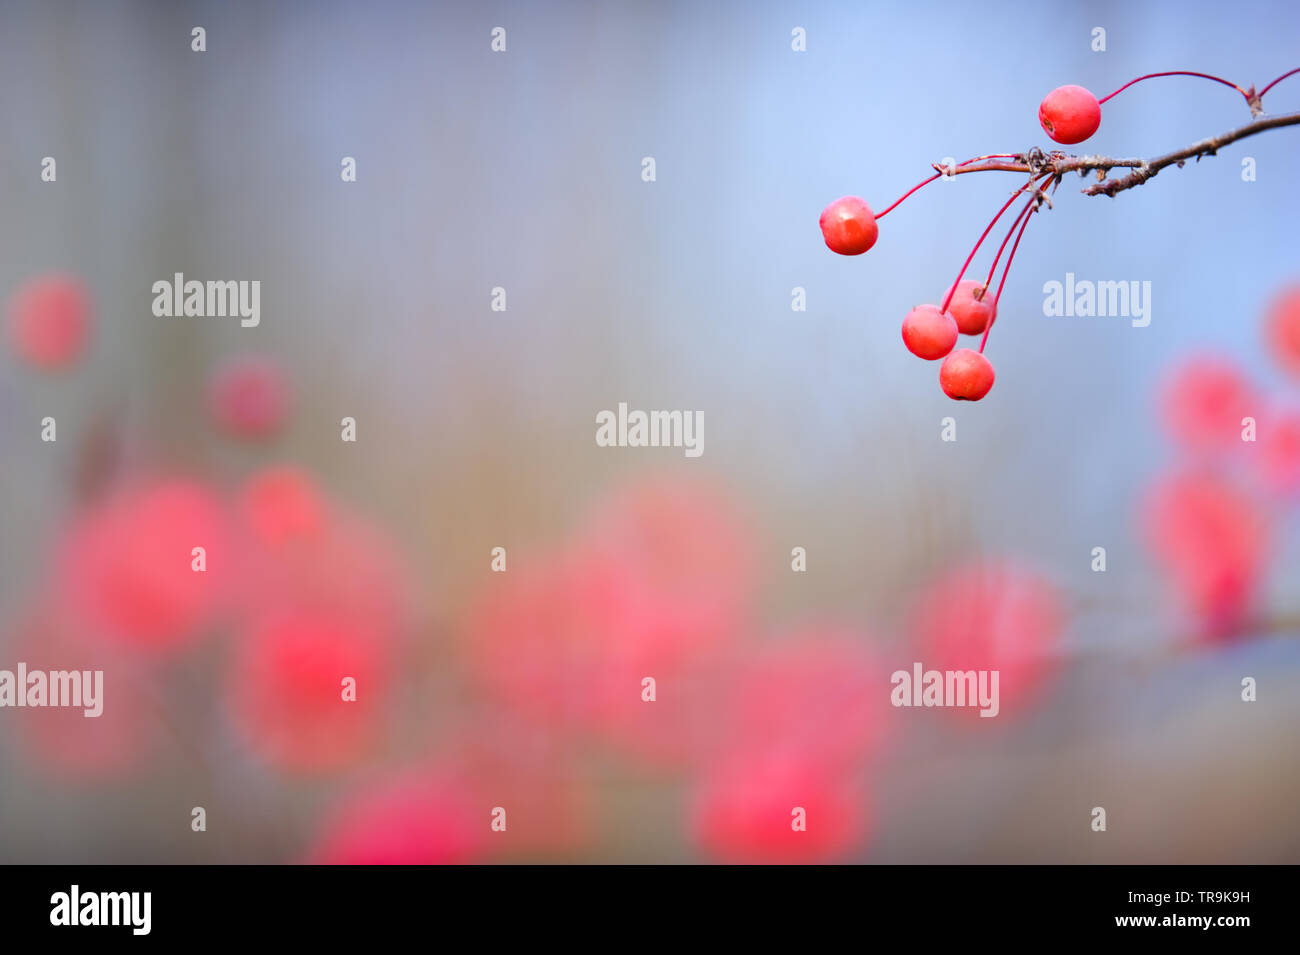 Siberian crab apple (Malus baccata) red berries hanging on branch. Stock Photo